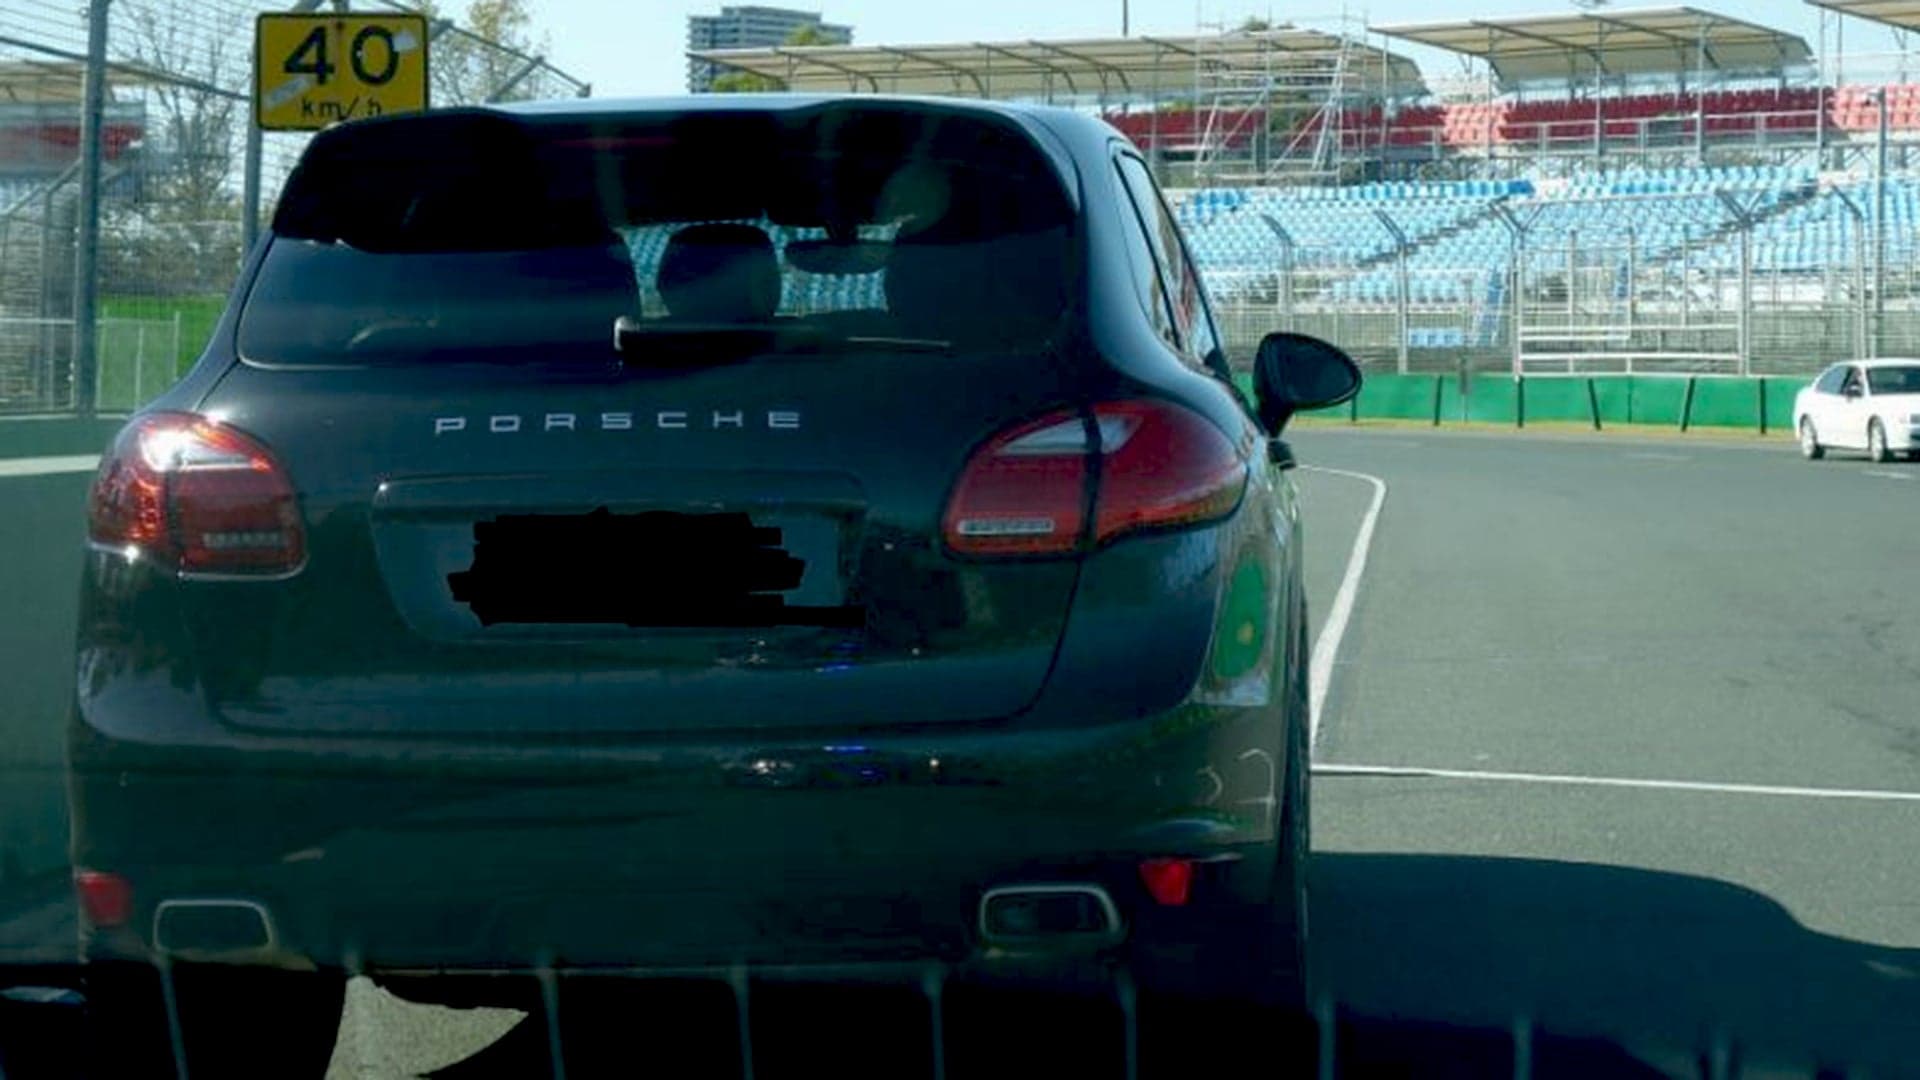 Man Buys a Porsche, Loses It Minutes Later for Speeding on Australian Grand Prix Road Course